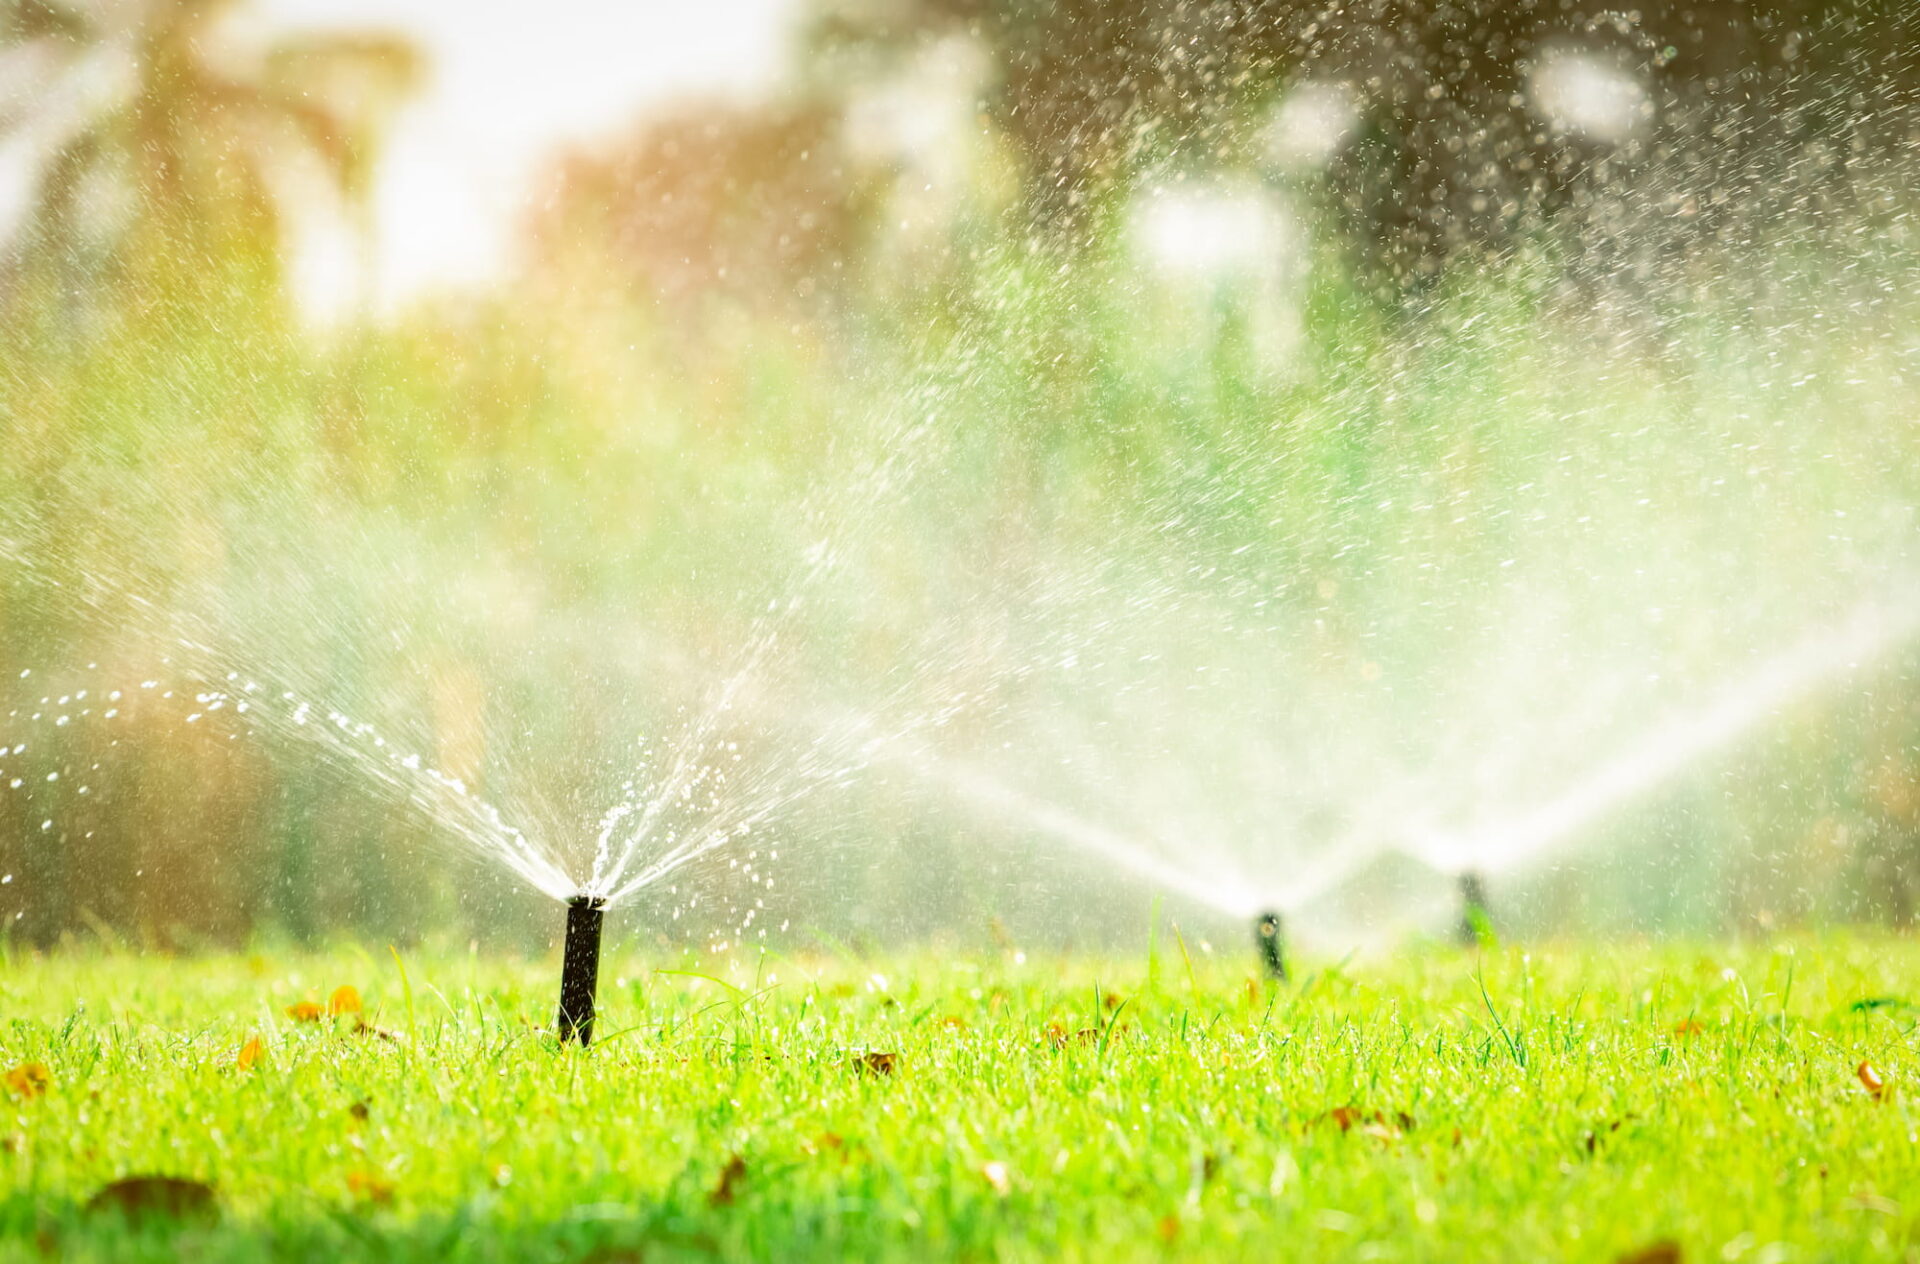 The top rated irrigation company in Raleigh, NC helps keep your grass lush and green.